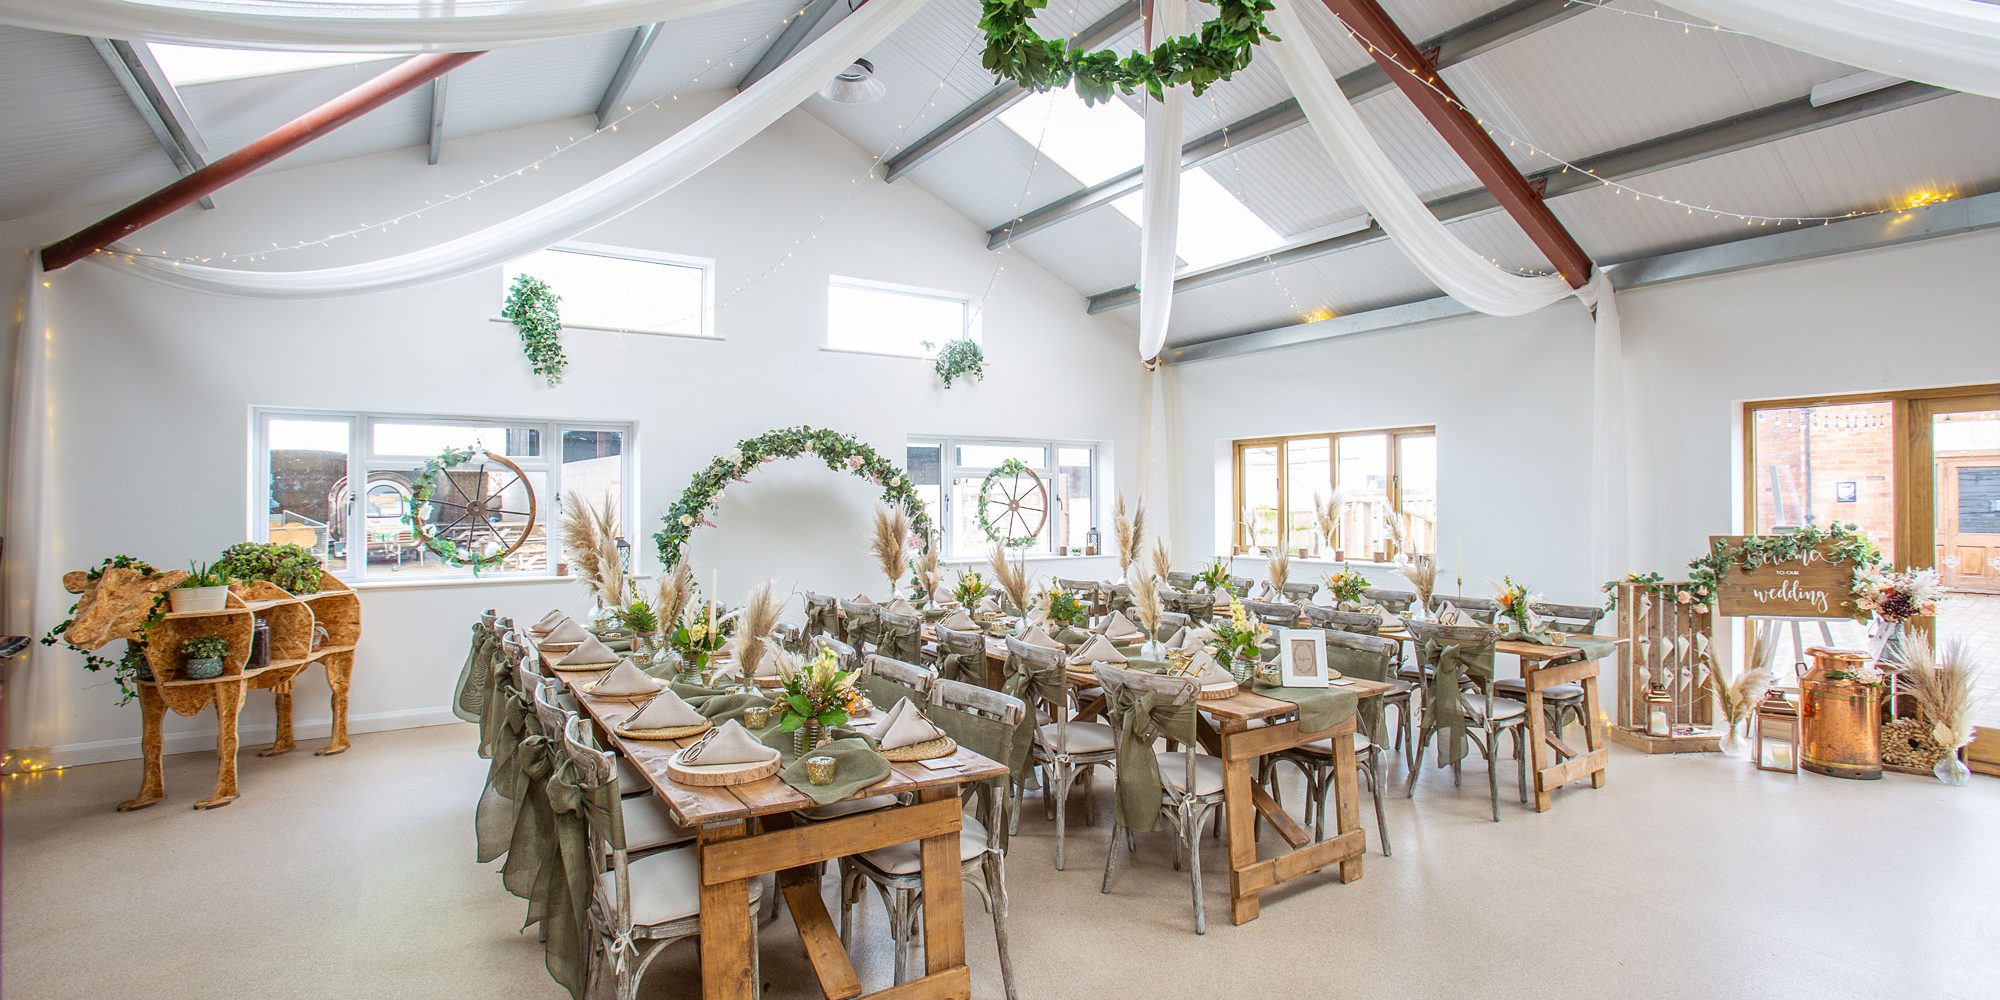 The New Barn was converted in 2019 and has large open plan space with an outlook and access to the rear courtyard. It is light and spacious with a high vaulted ceiling in the main part. It is ideally suited for weddings of 30 to 120 guests